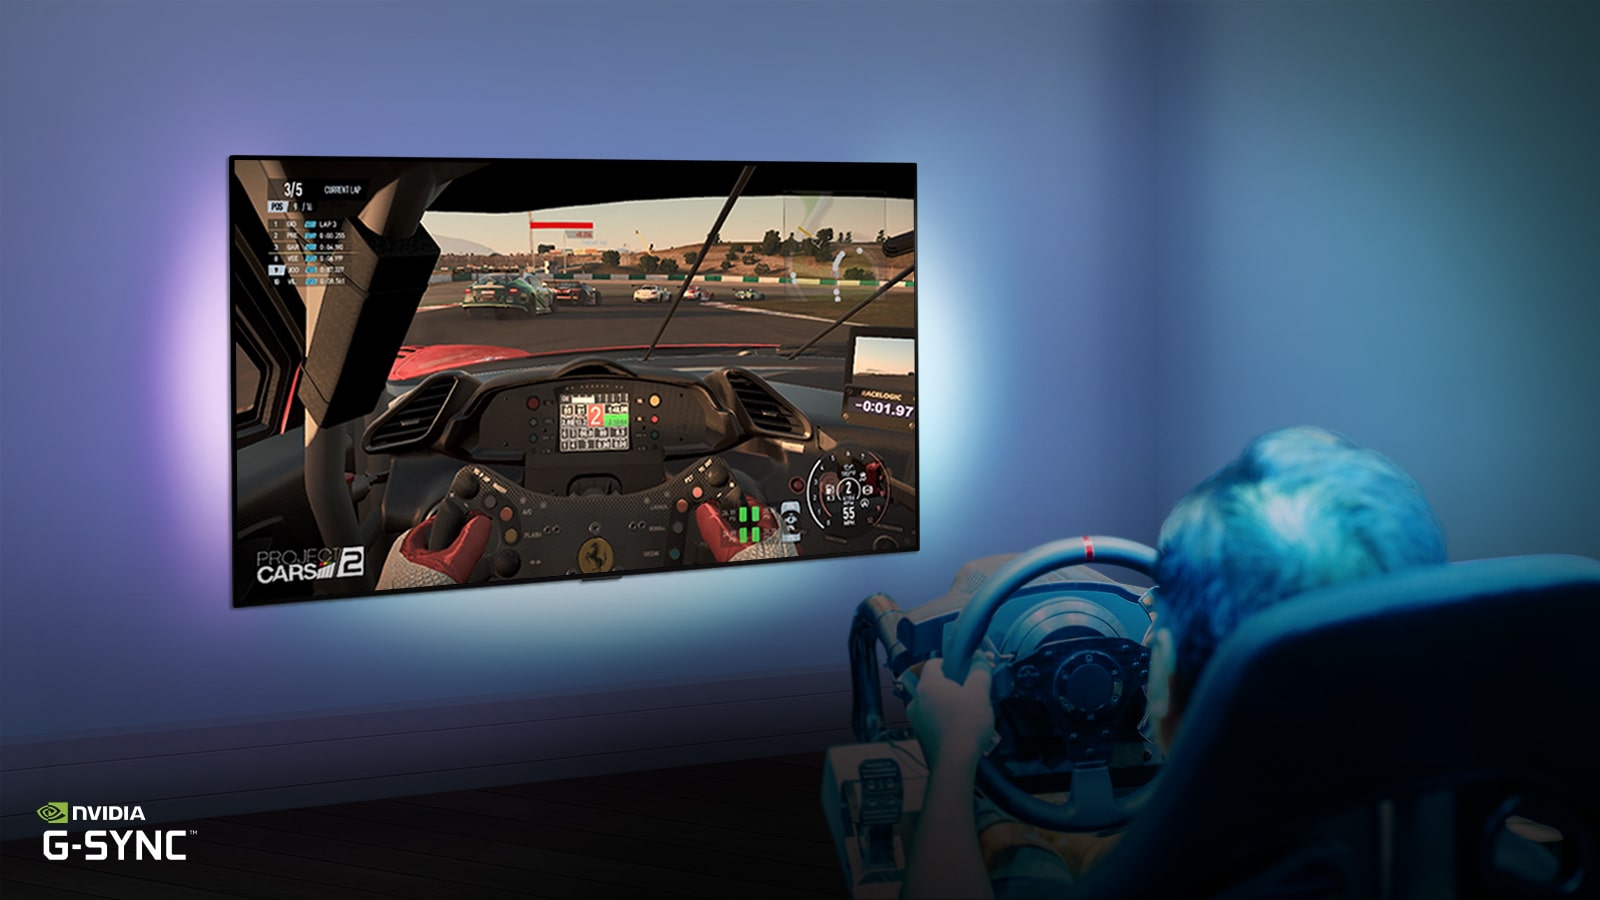 Man sitting on a racer gaming chair, holding a racing wheel while playing a racing game on a TV screen